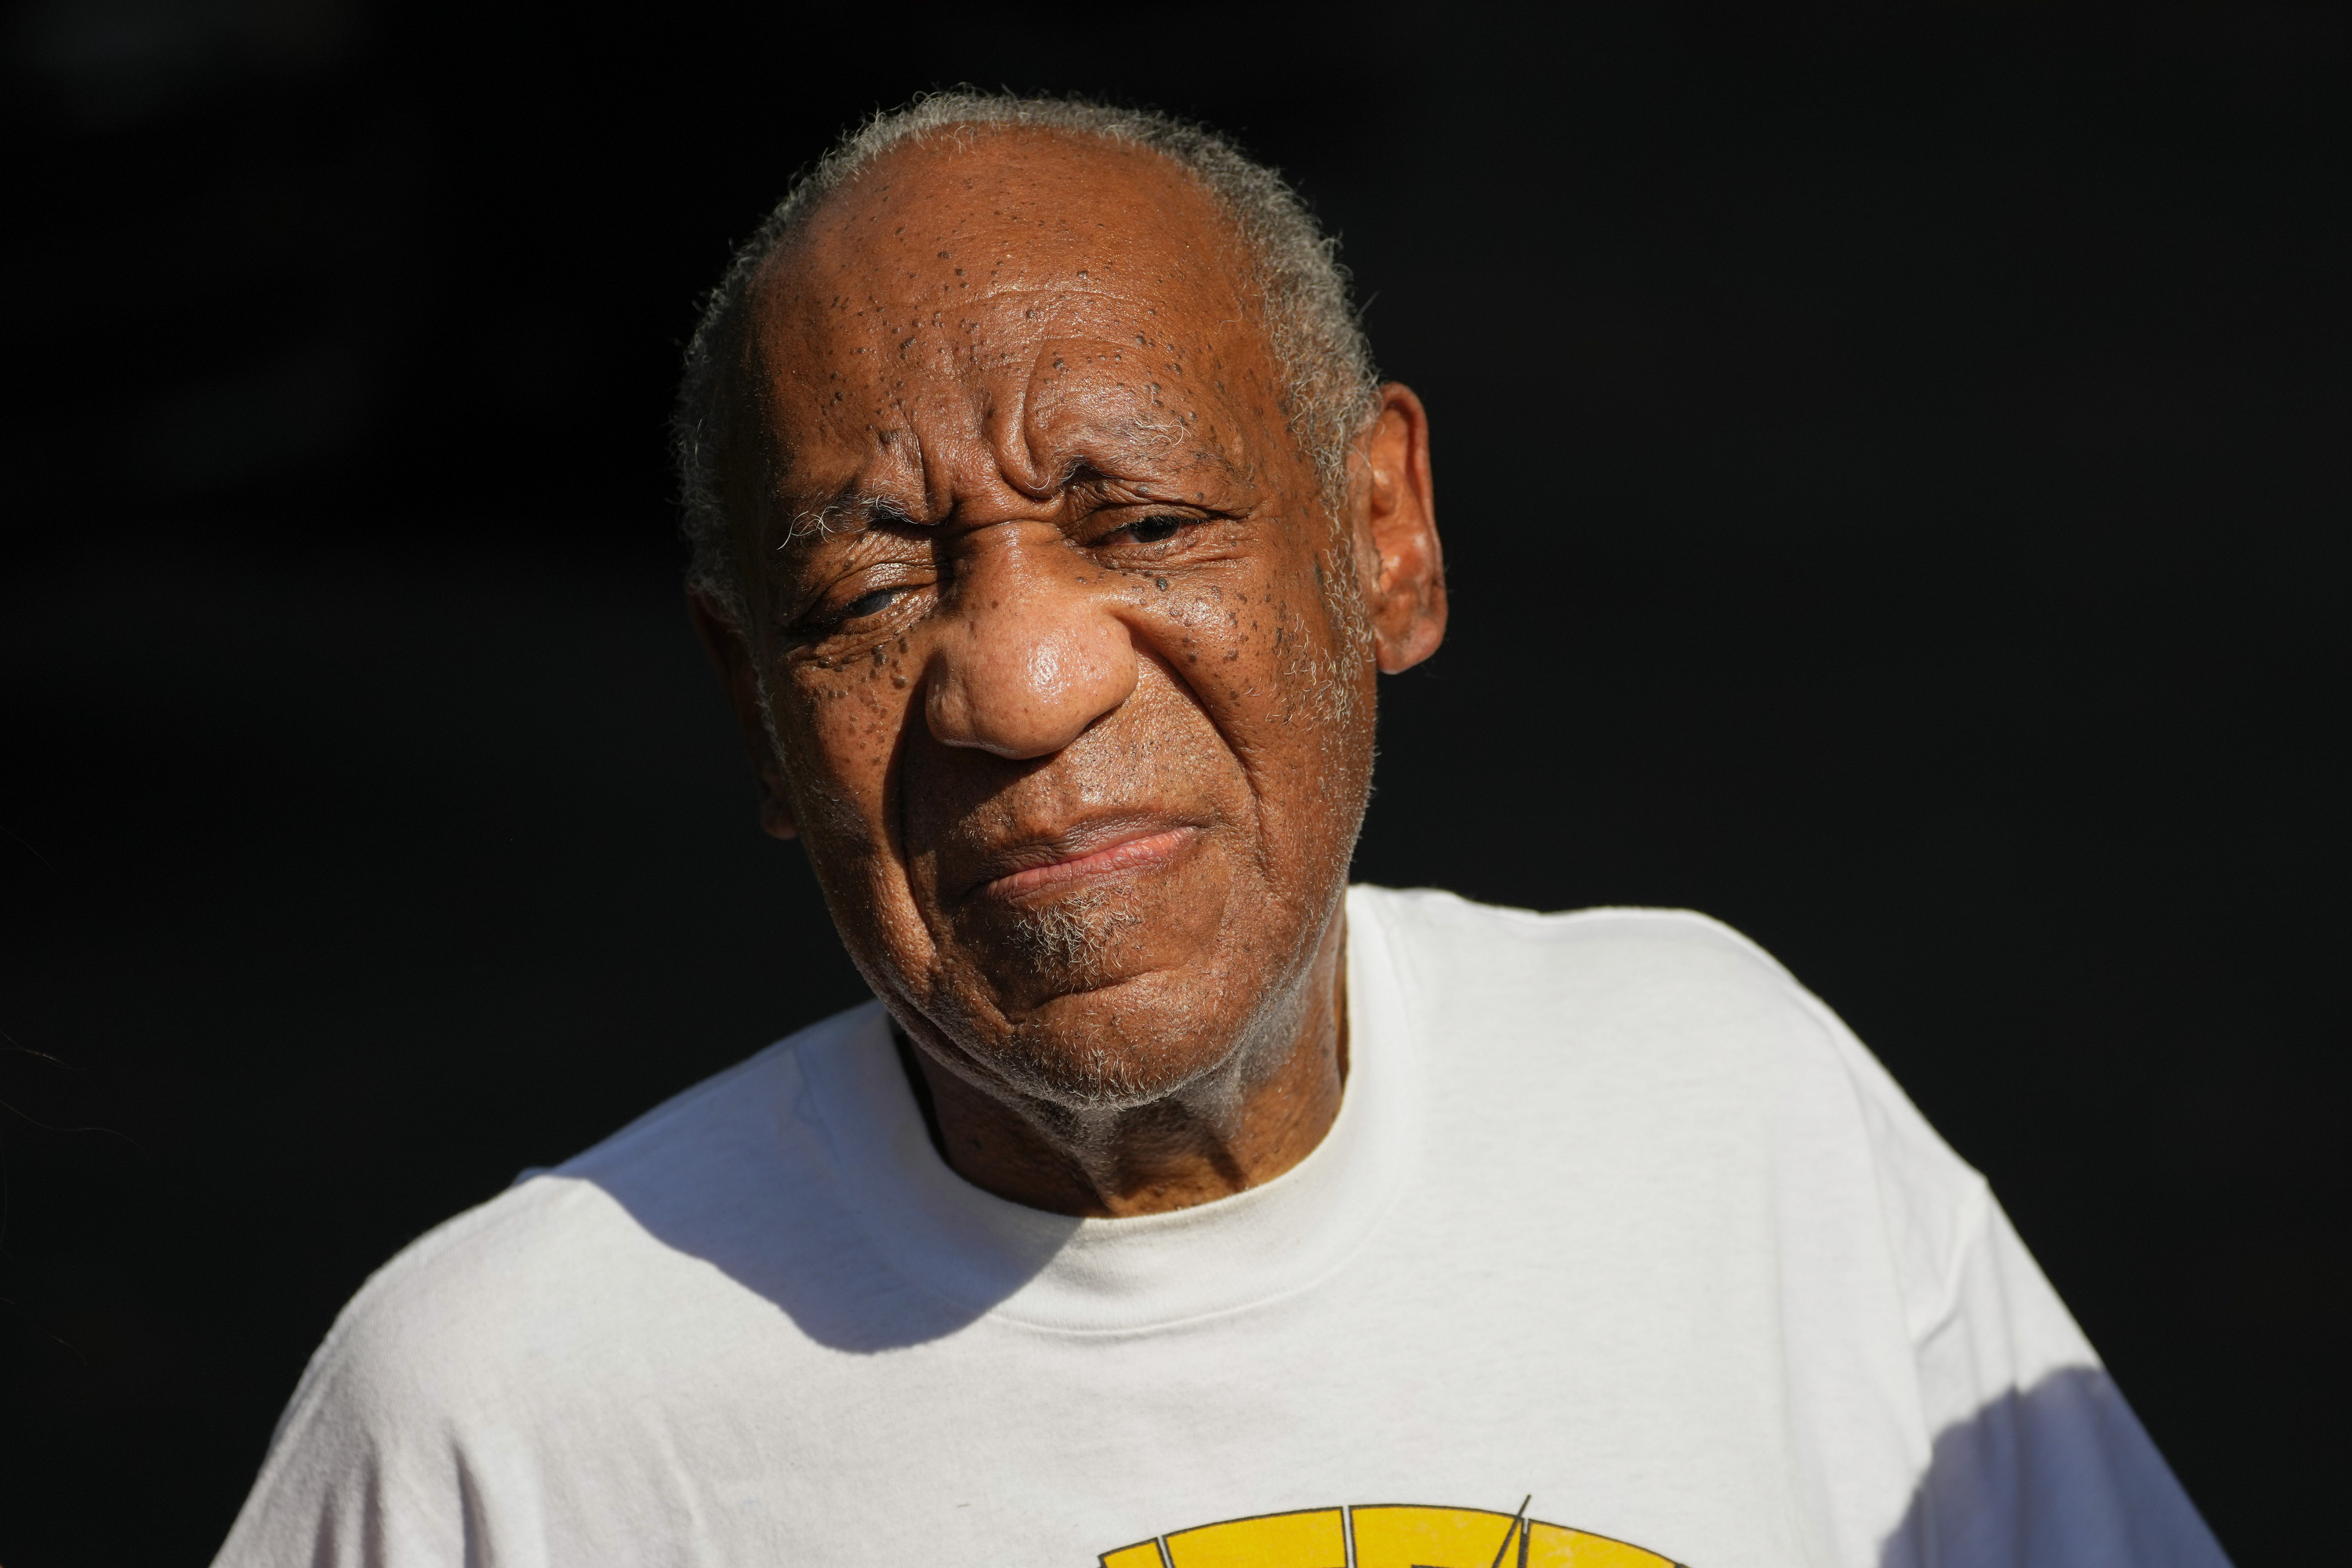 Actor and comedian Bill Cosby in 2021. Photo: AP